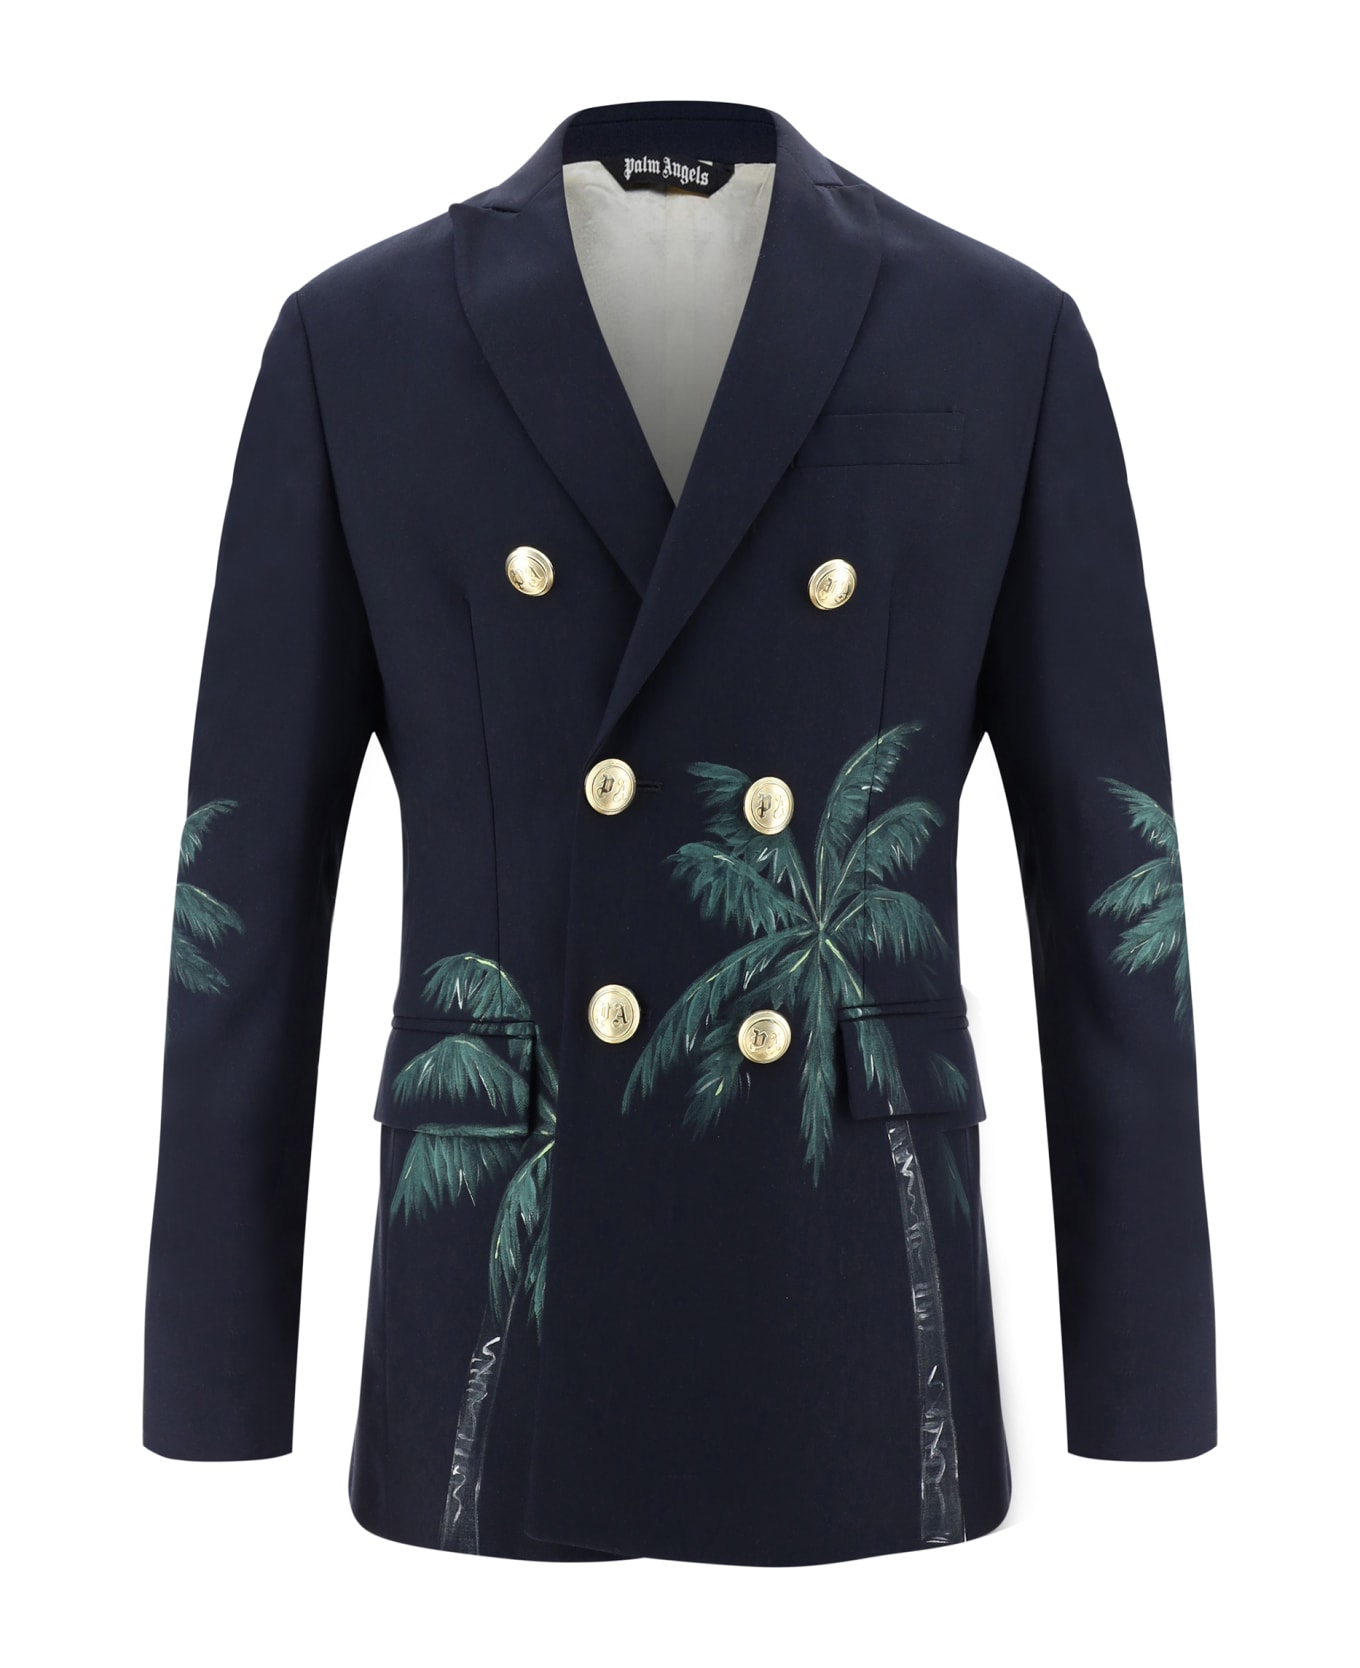 Palm Angels Double-breasted Blazer - Blue